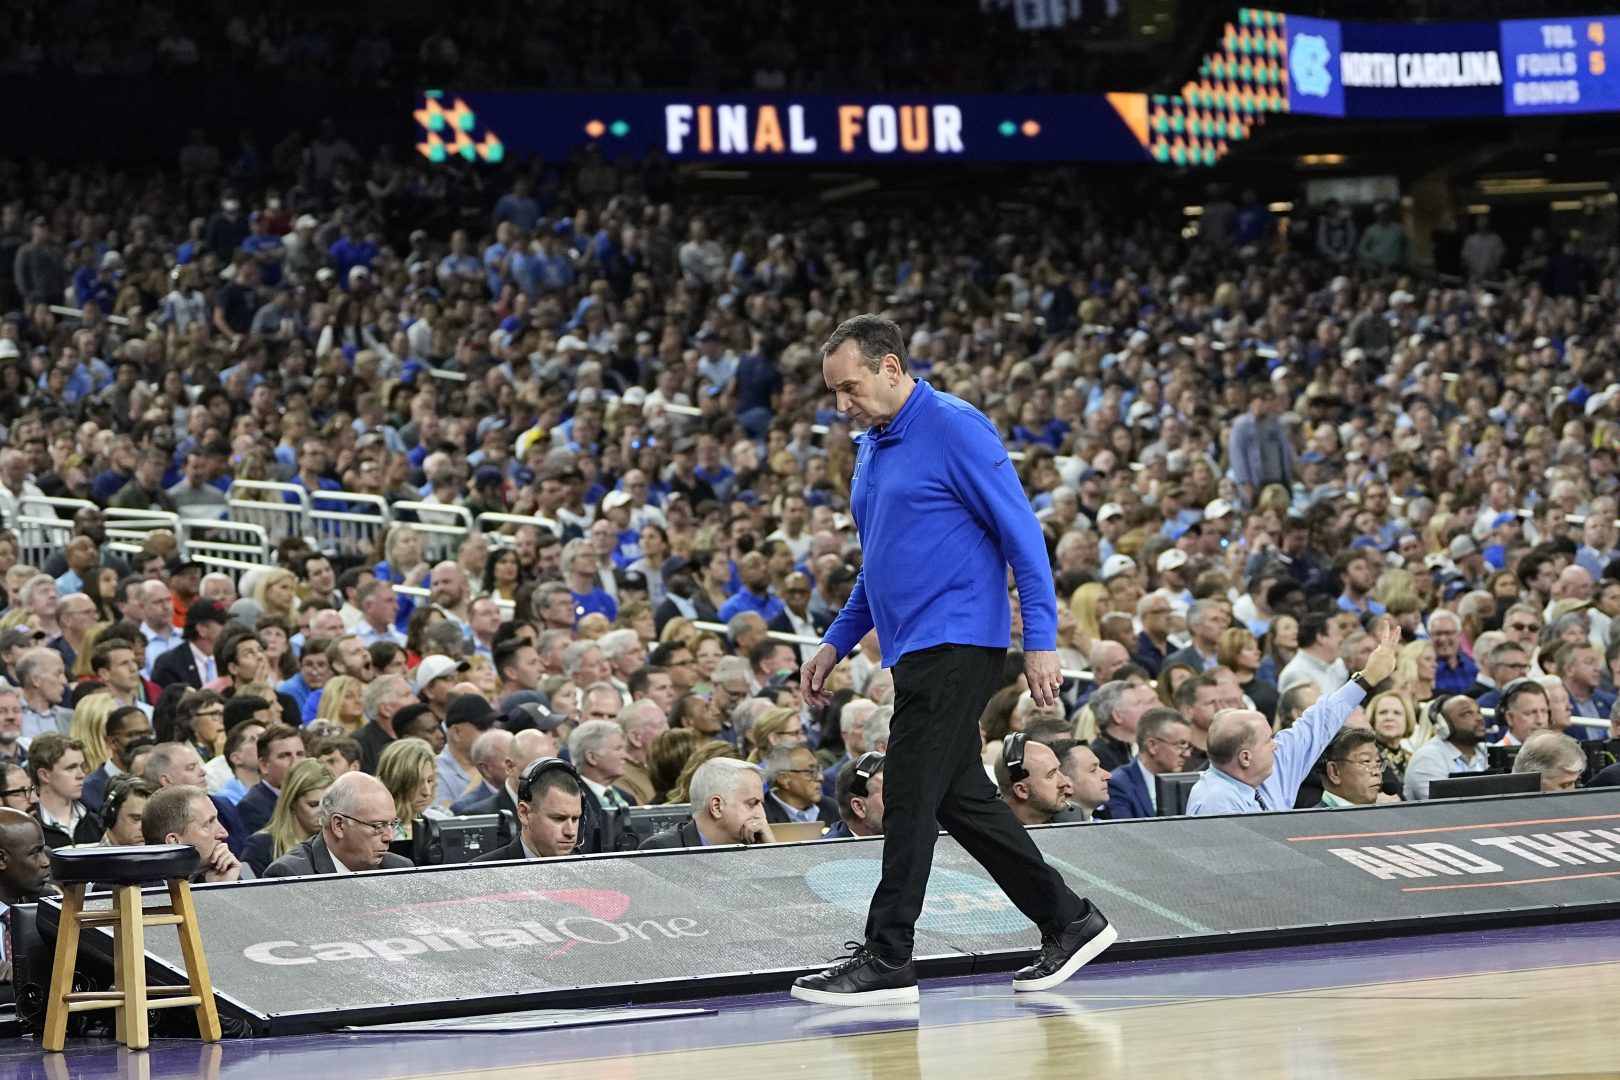 Duke head coach Mike Krzyzewski walks along the sideline during the first half of a college basketball game against North Carolina in the semifinal round of the Men's Final Four NCAA tournament, Saturday, April 2, 2022, in New Orleans. (AP Photo/David J. Phillip)